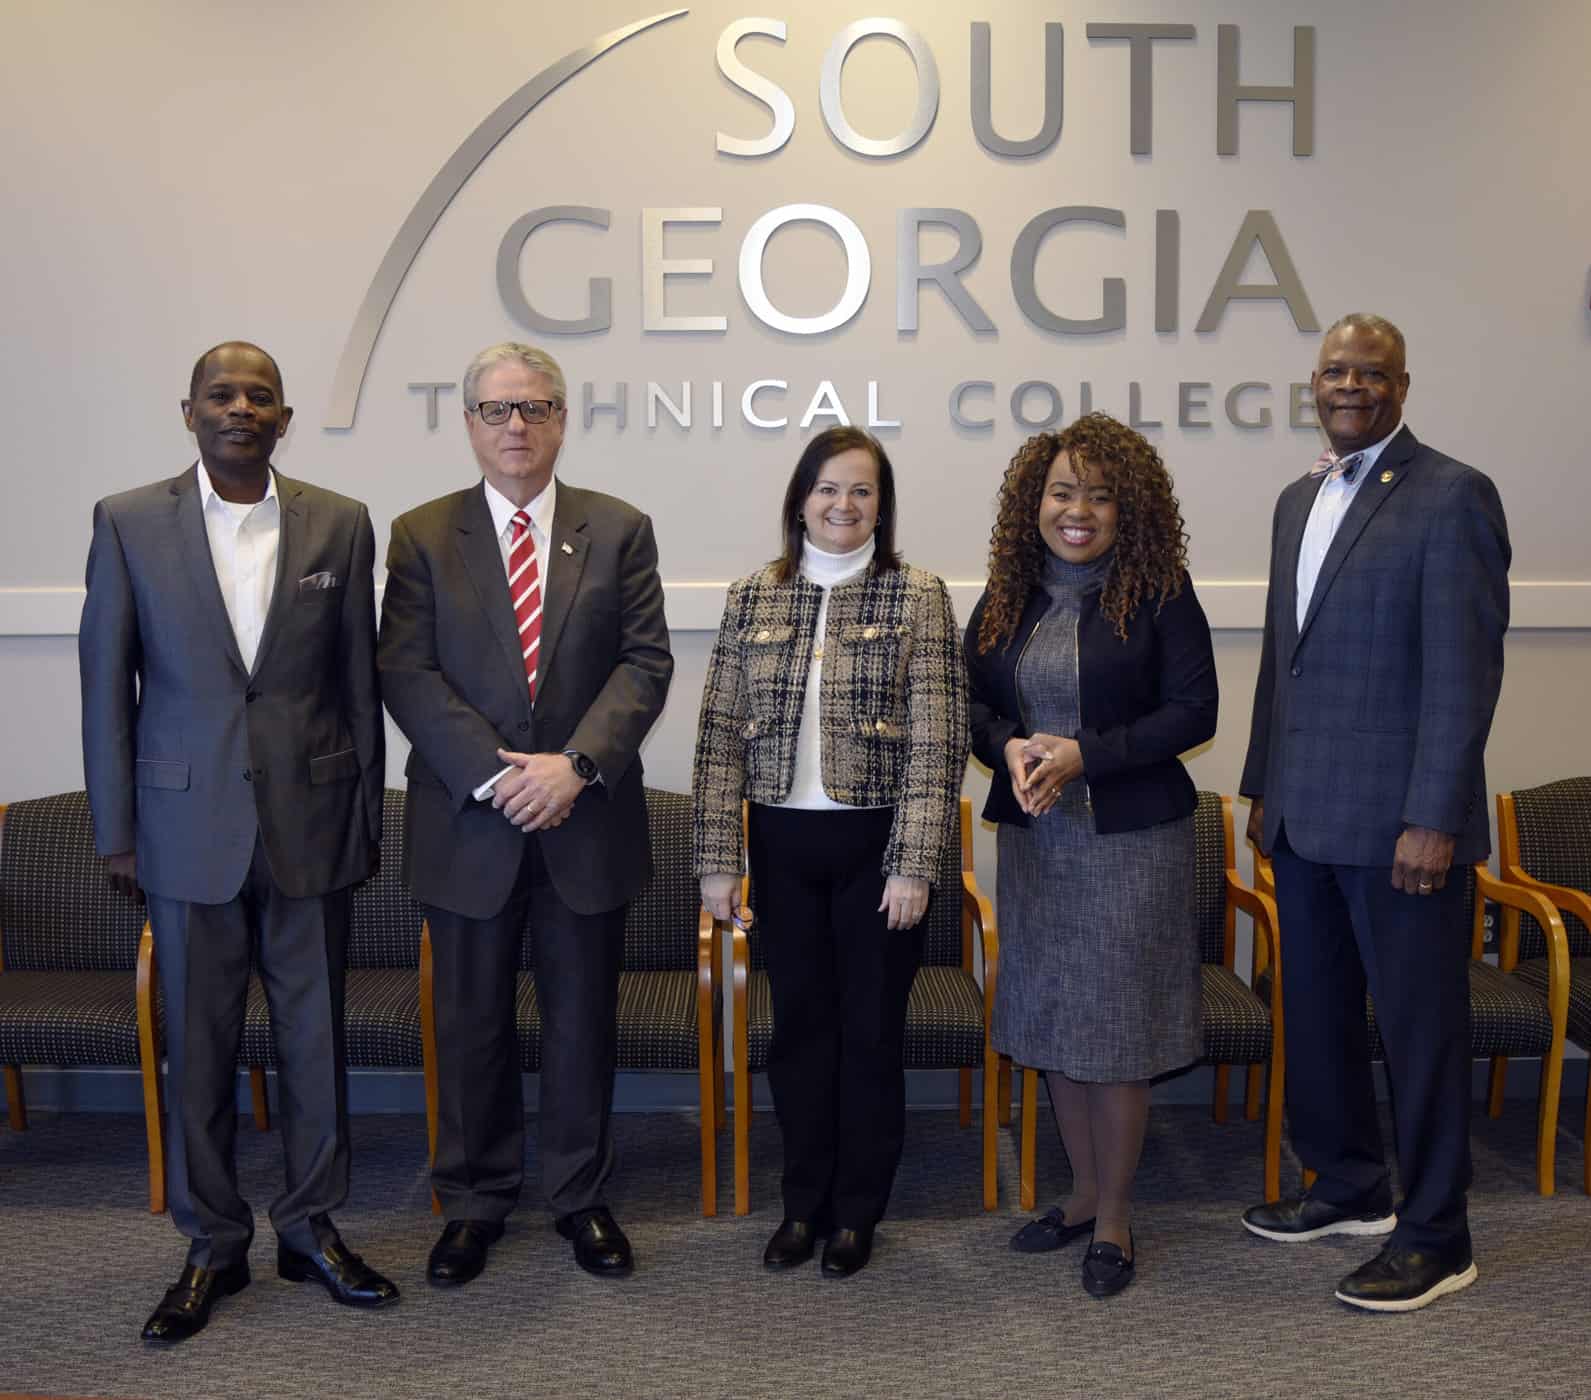 Pictured (l-r) are members of the SGTC GOAL selection committee Ervin Anderson, Richard McCorkle, Dr. Gaye Hayes, Amber Batchelor, and Michael Coley.